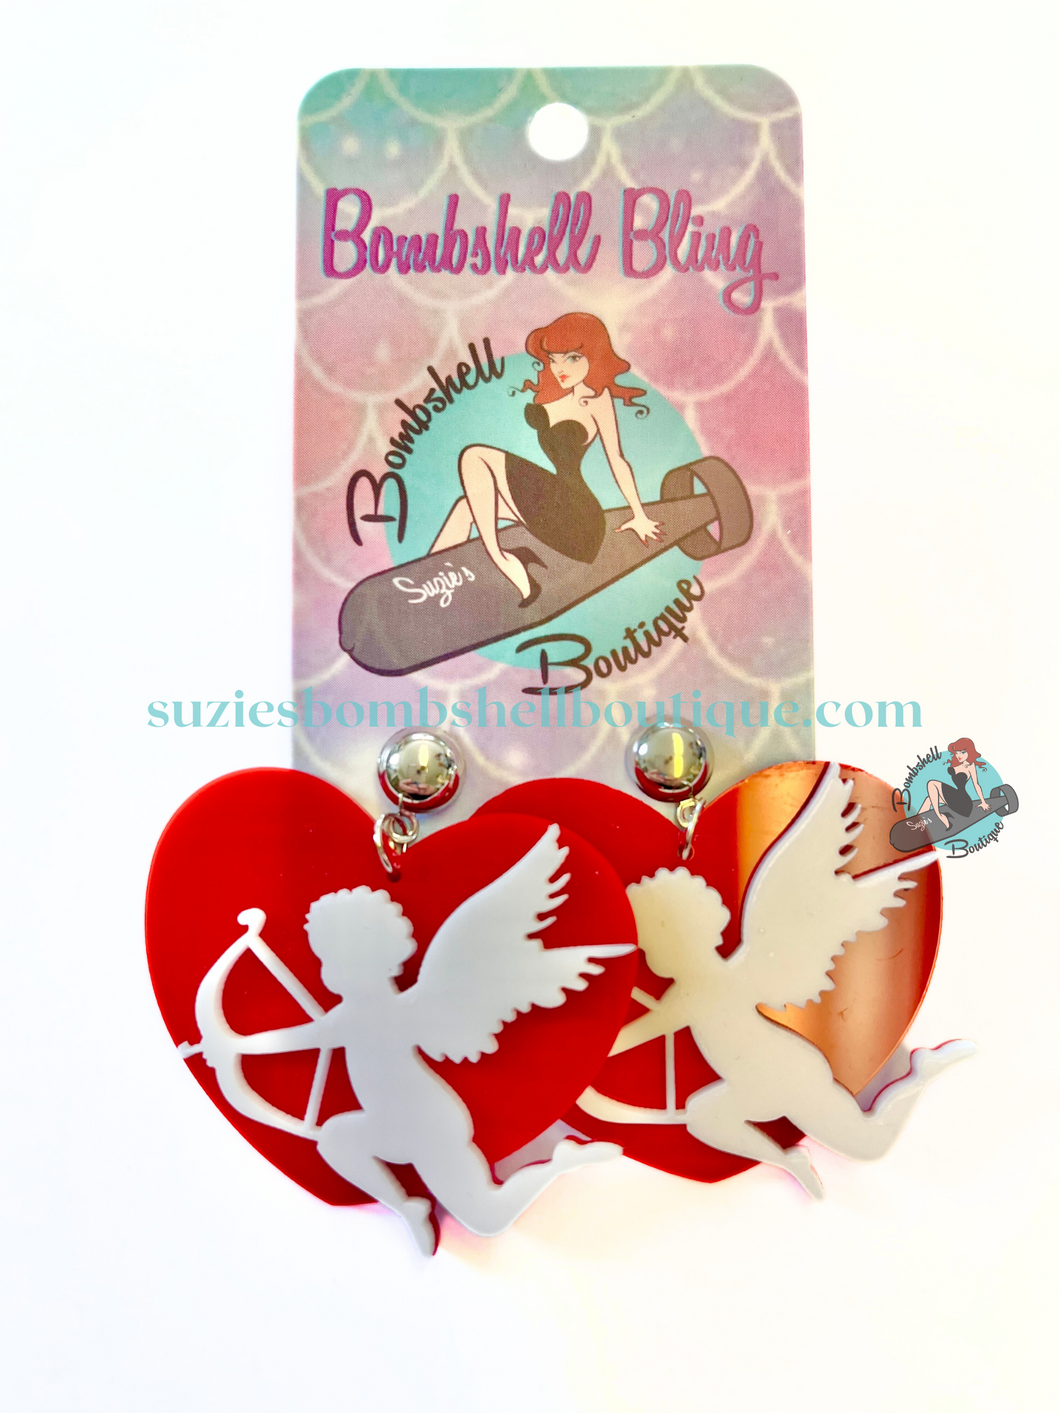 Bombshell Bling Cupid Earrings acrylic heart shaped cupid earrings valentine valentine's novelty altfashion pinup resin costume jewellery Canadian Pin-Up Shop Suzie's Bombshell Boutique